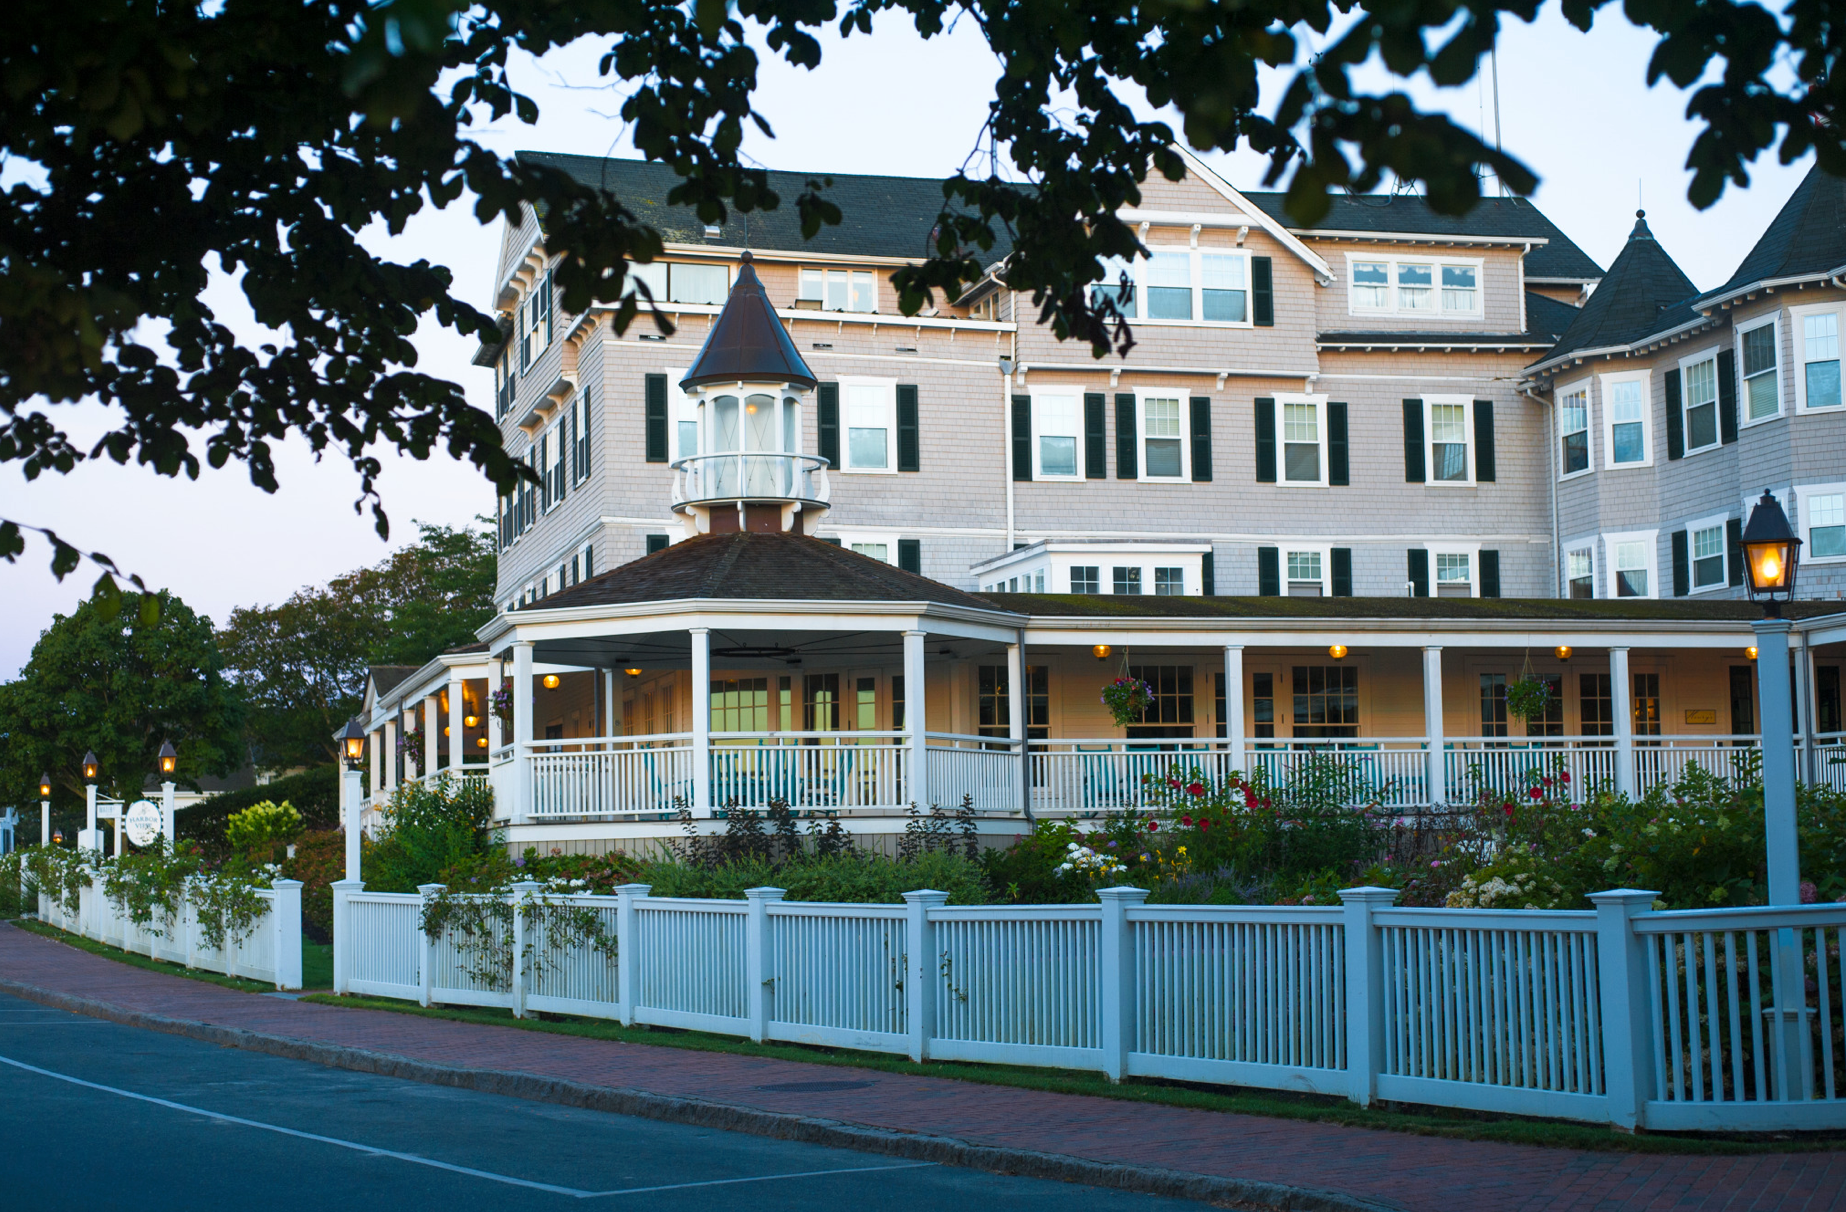 We Found Low-Key Mini Moon Bliss — And Some History — In This Martha’s Vineyard Town
